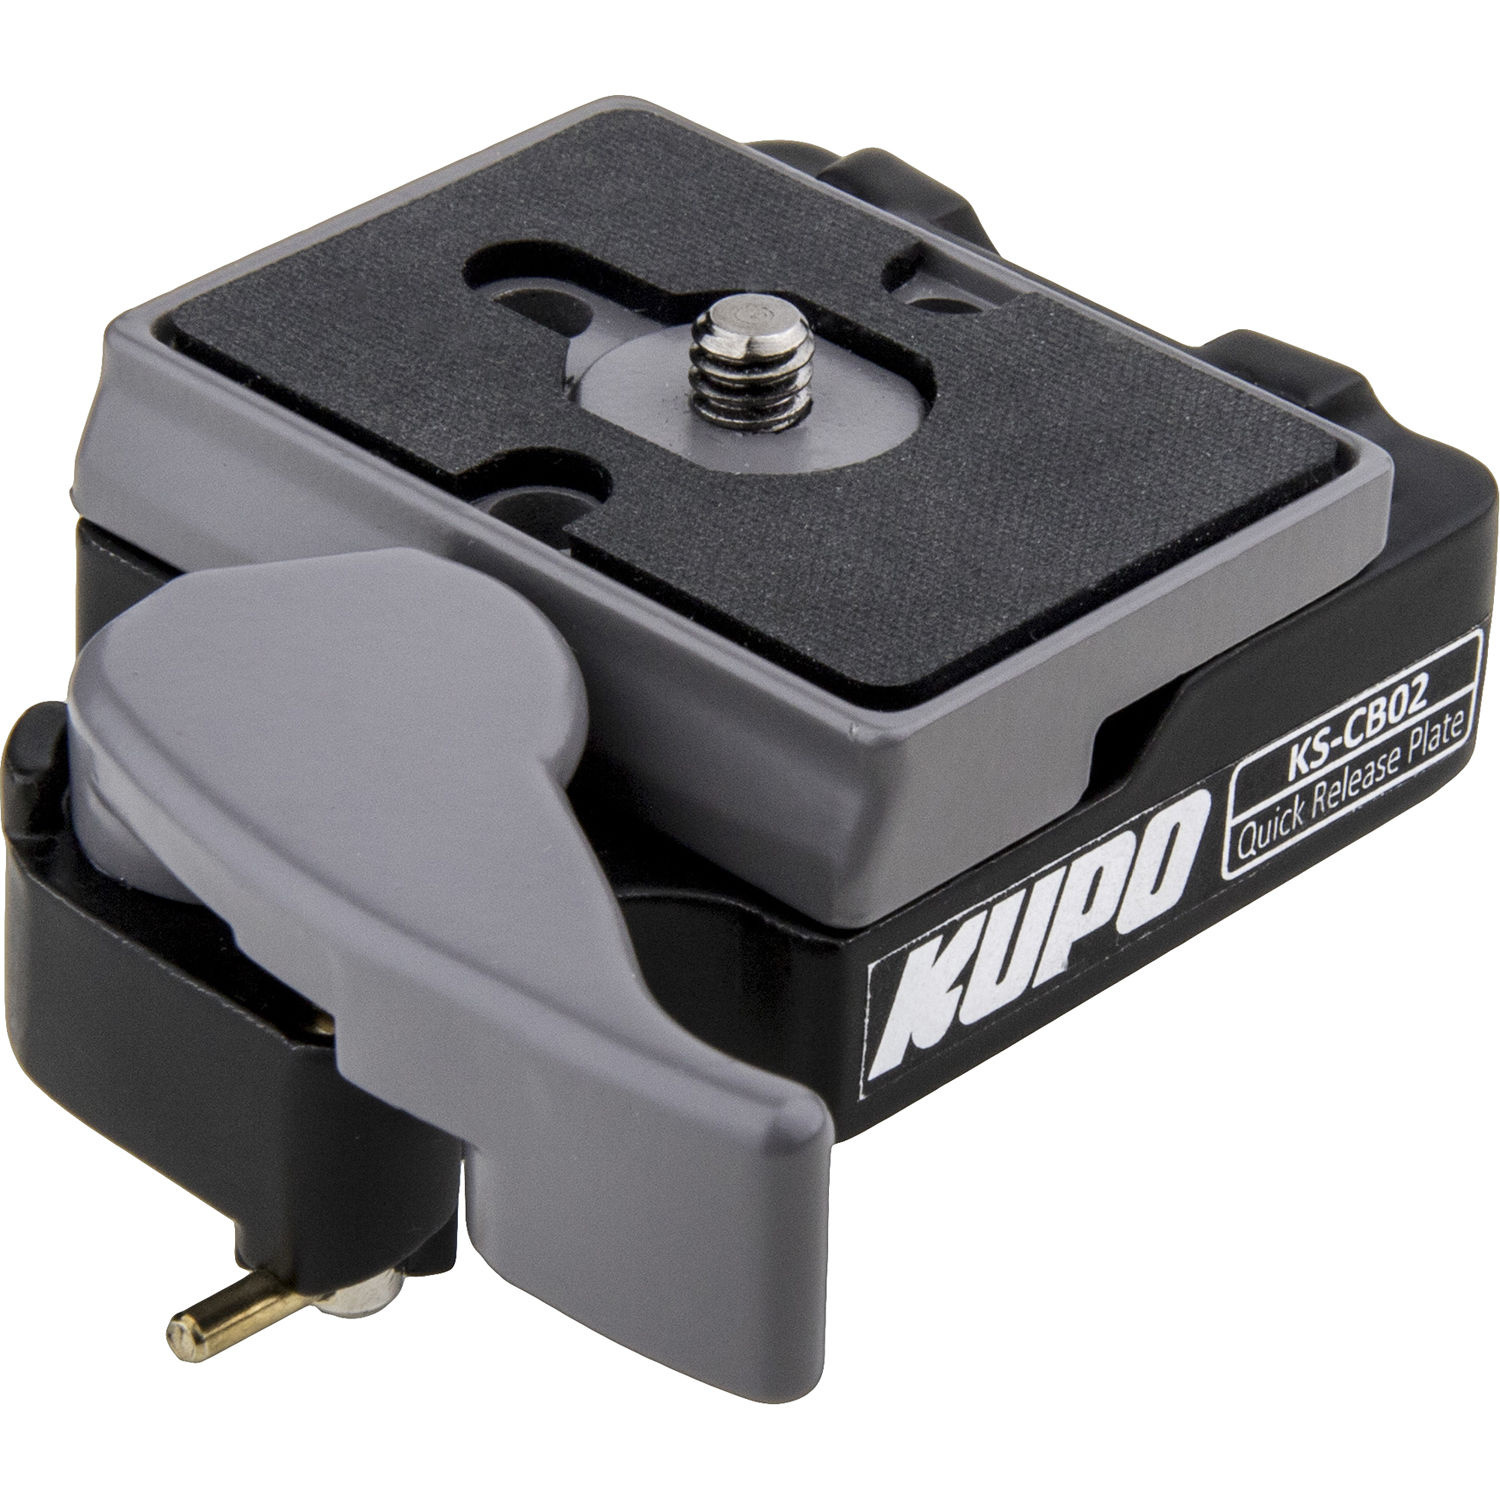 Kupo KS-CB02 Quick Release Assembly and Camera Plate